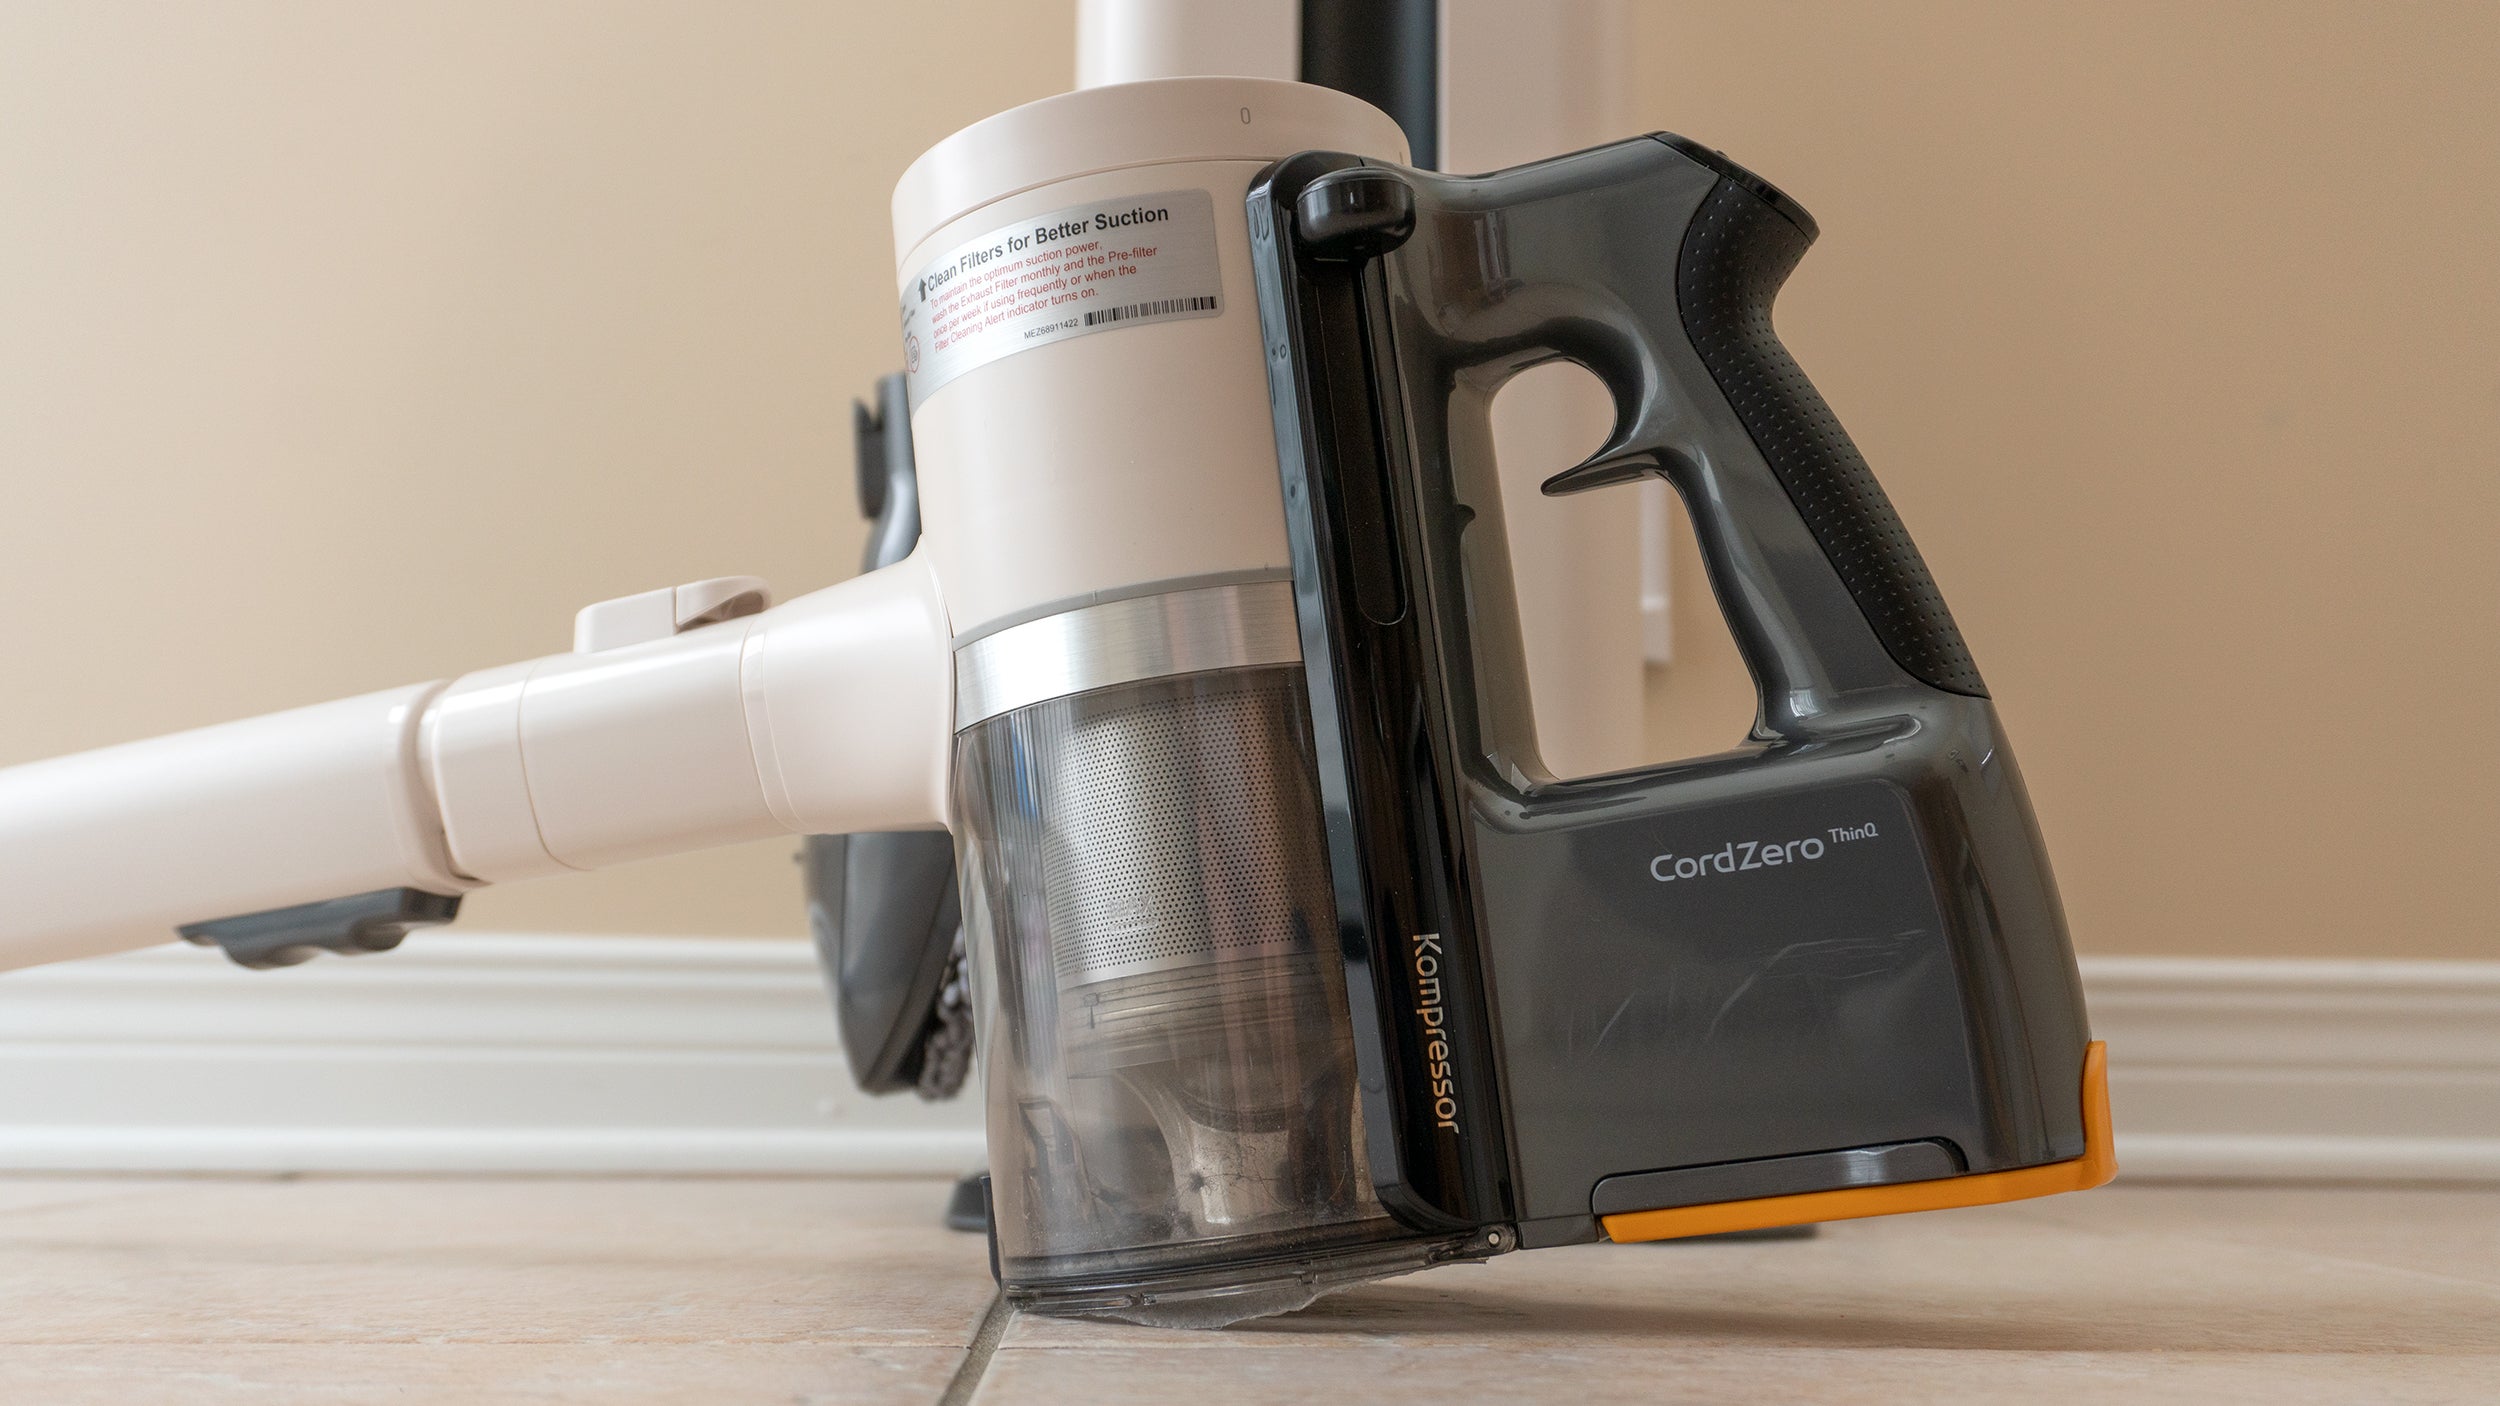 The A9 Kompressor+ gets part of its name from a mechanism that uses a sliding lever to compress dust and dirt in the bin so it can go longer between empties. (Photo: Andrew Liszewski/Gizmodo)